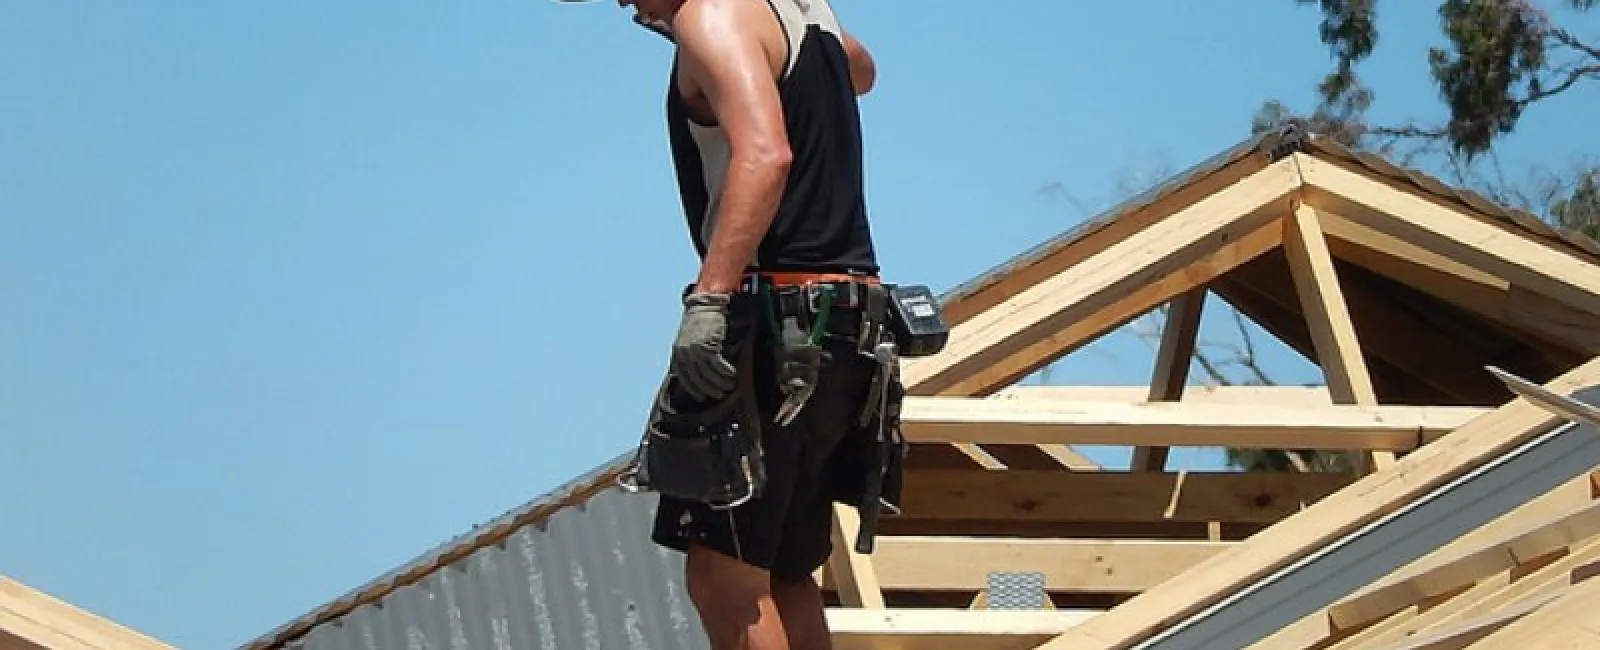 5 Questions to Ask Roofers When Roofing Gets Confusing